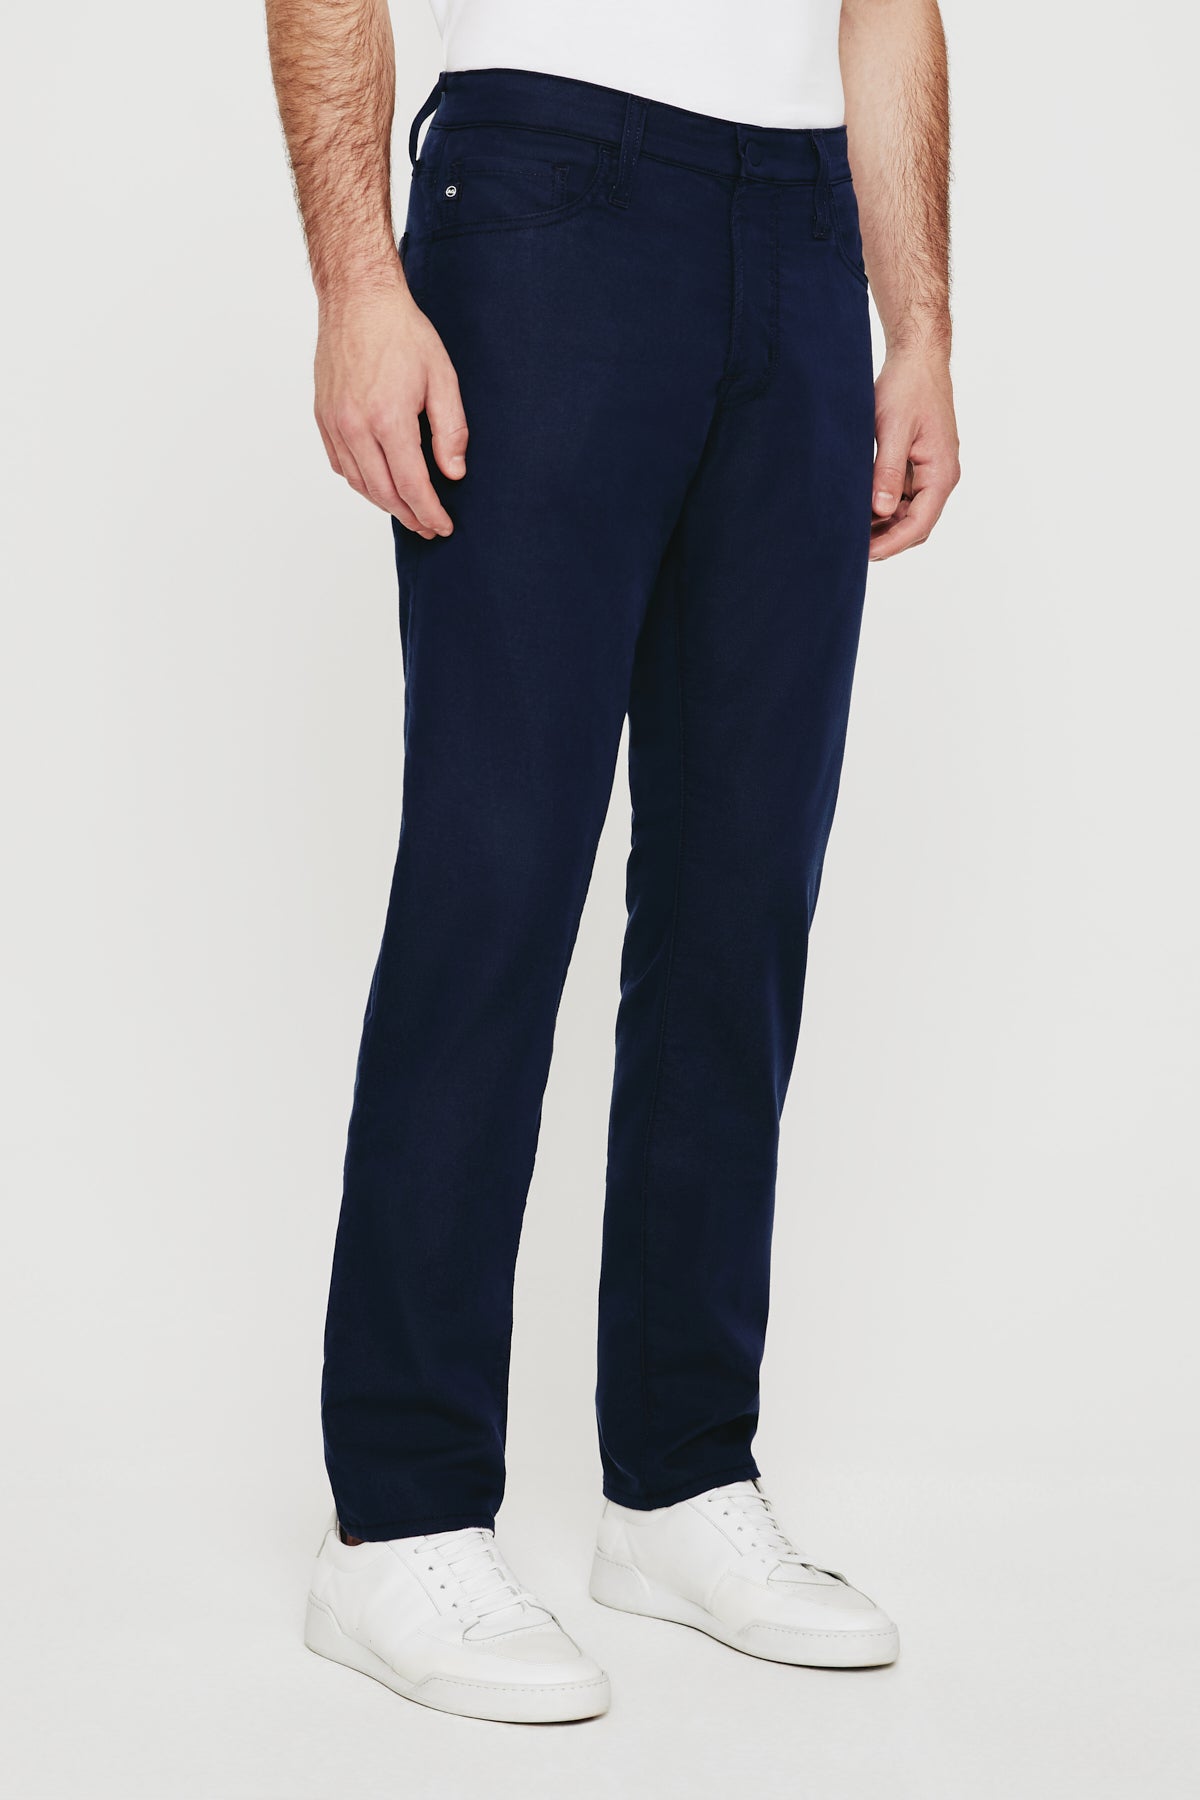 AG Adriano Goldschmied Tellis Airluxe Commuter Performance Sateen Pants